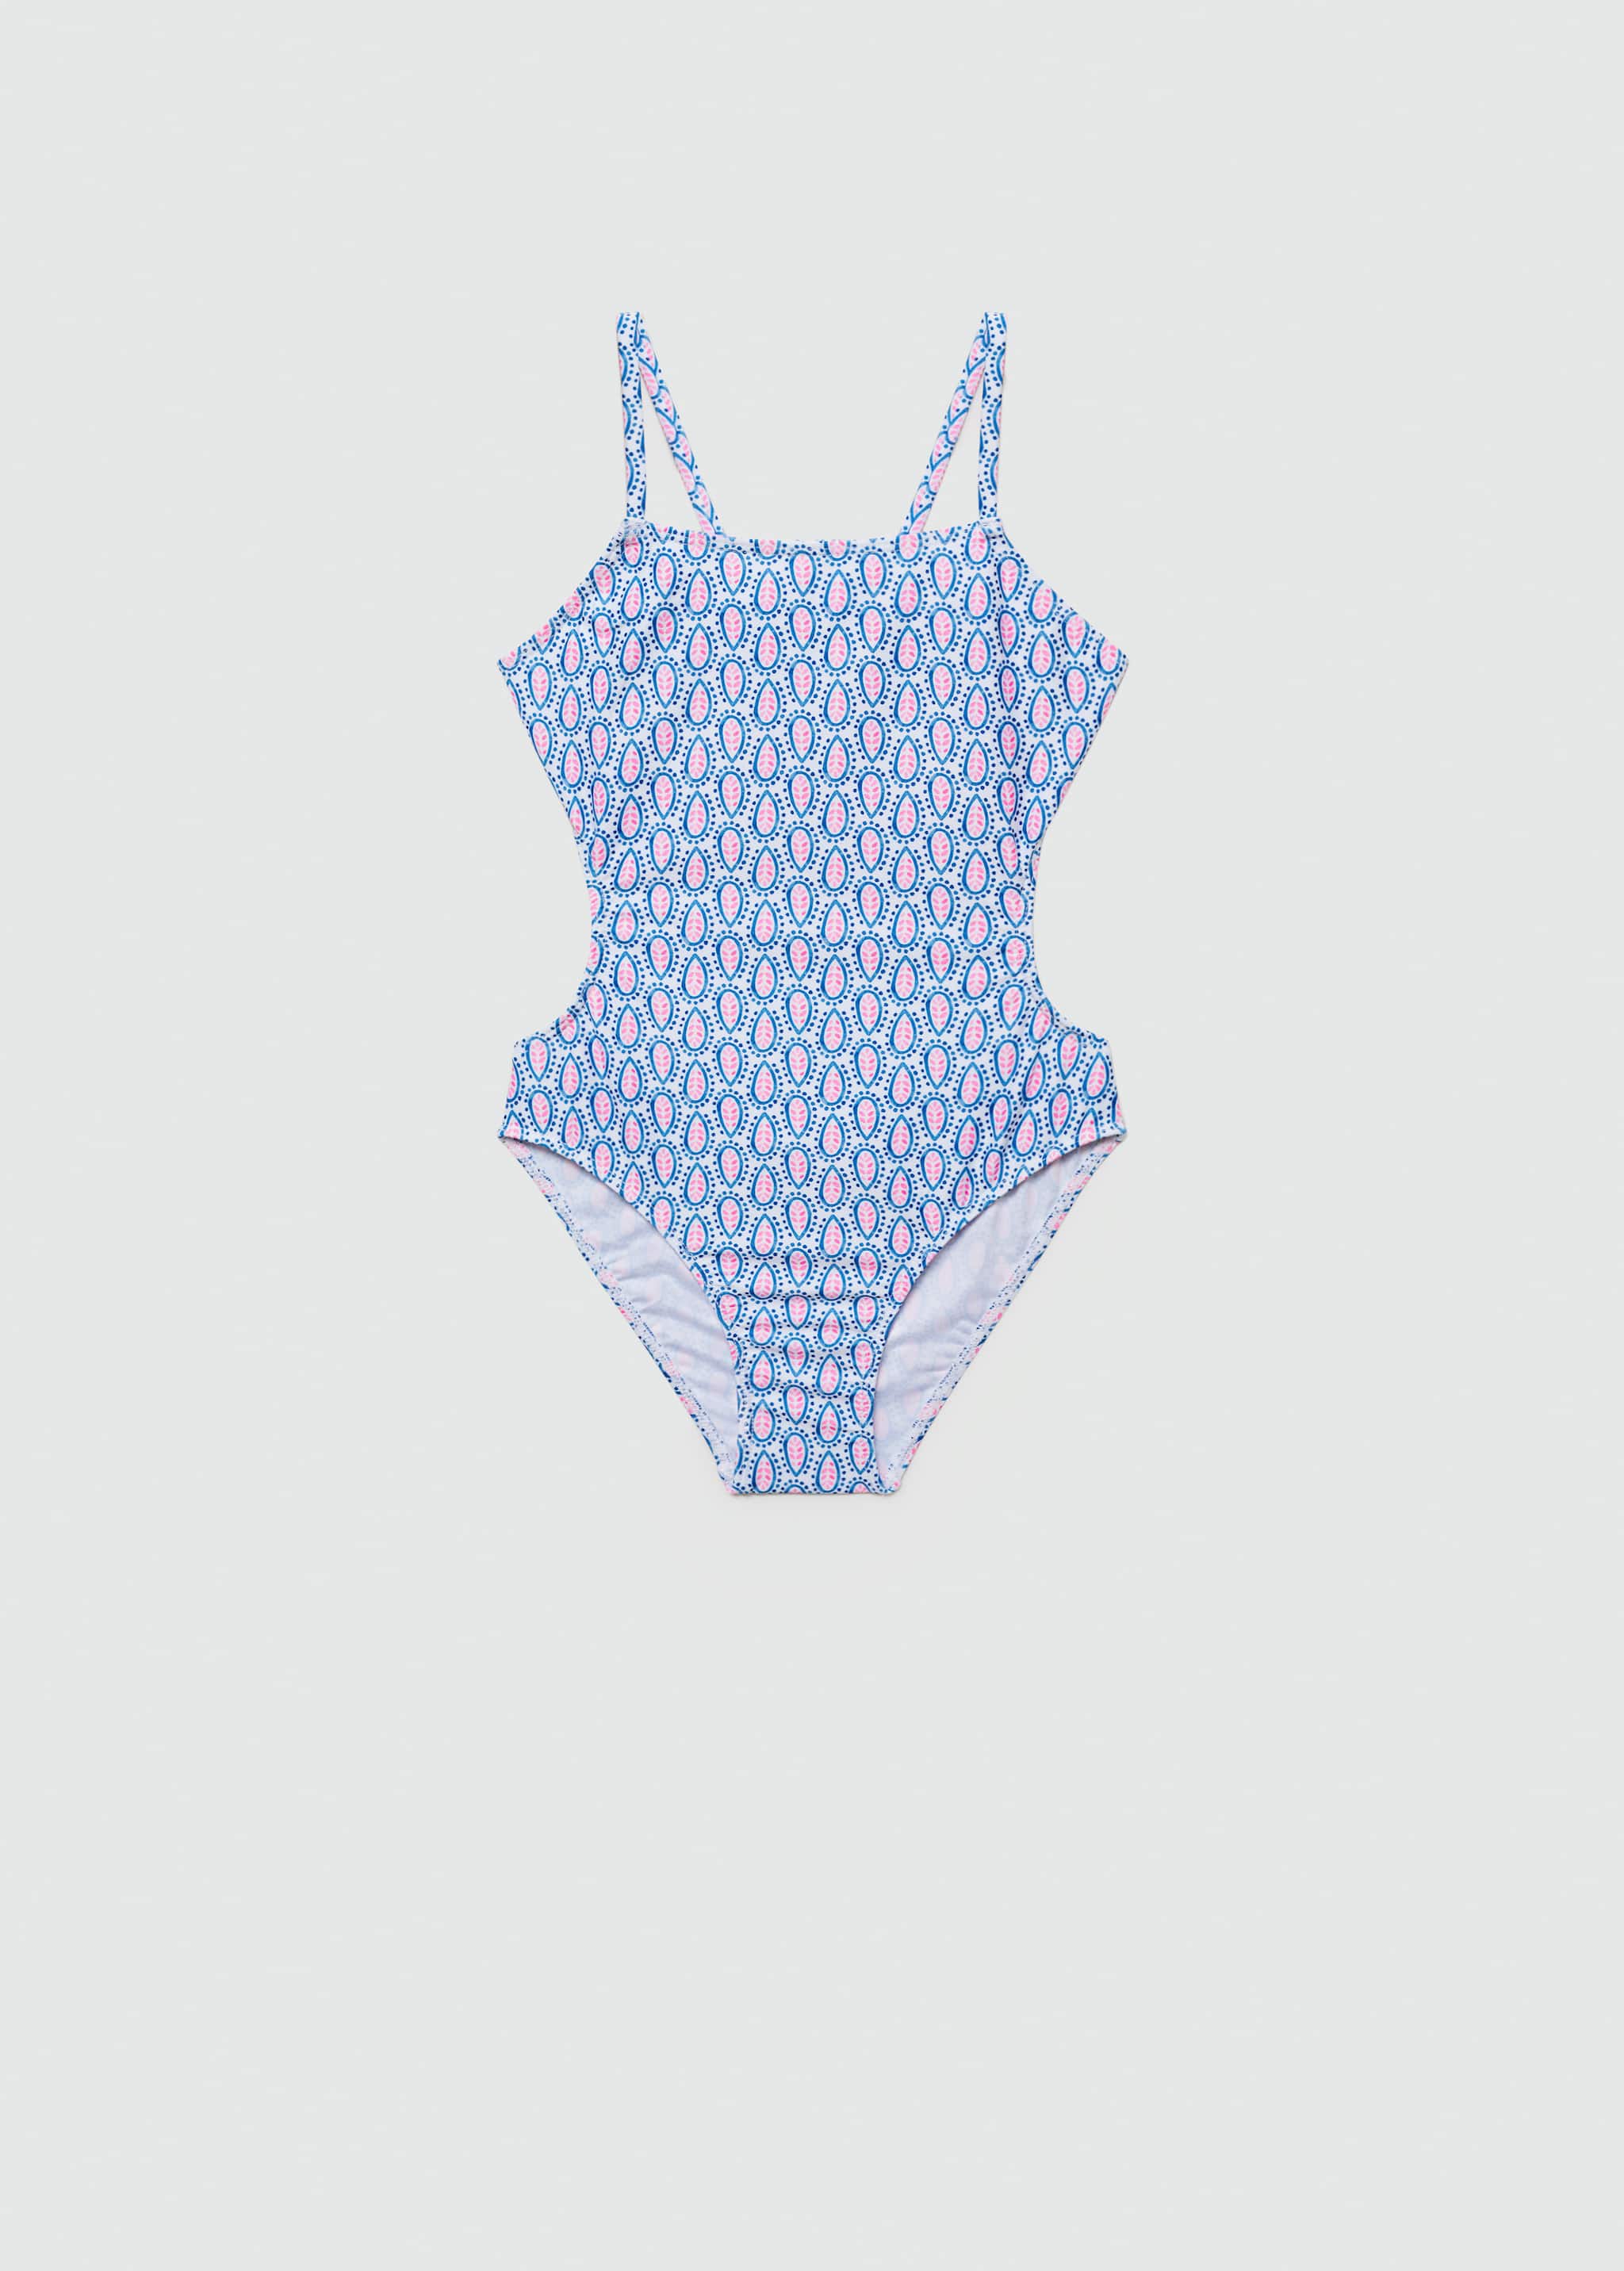 Printed swimsuit - Article without model